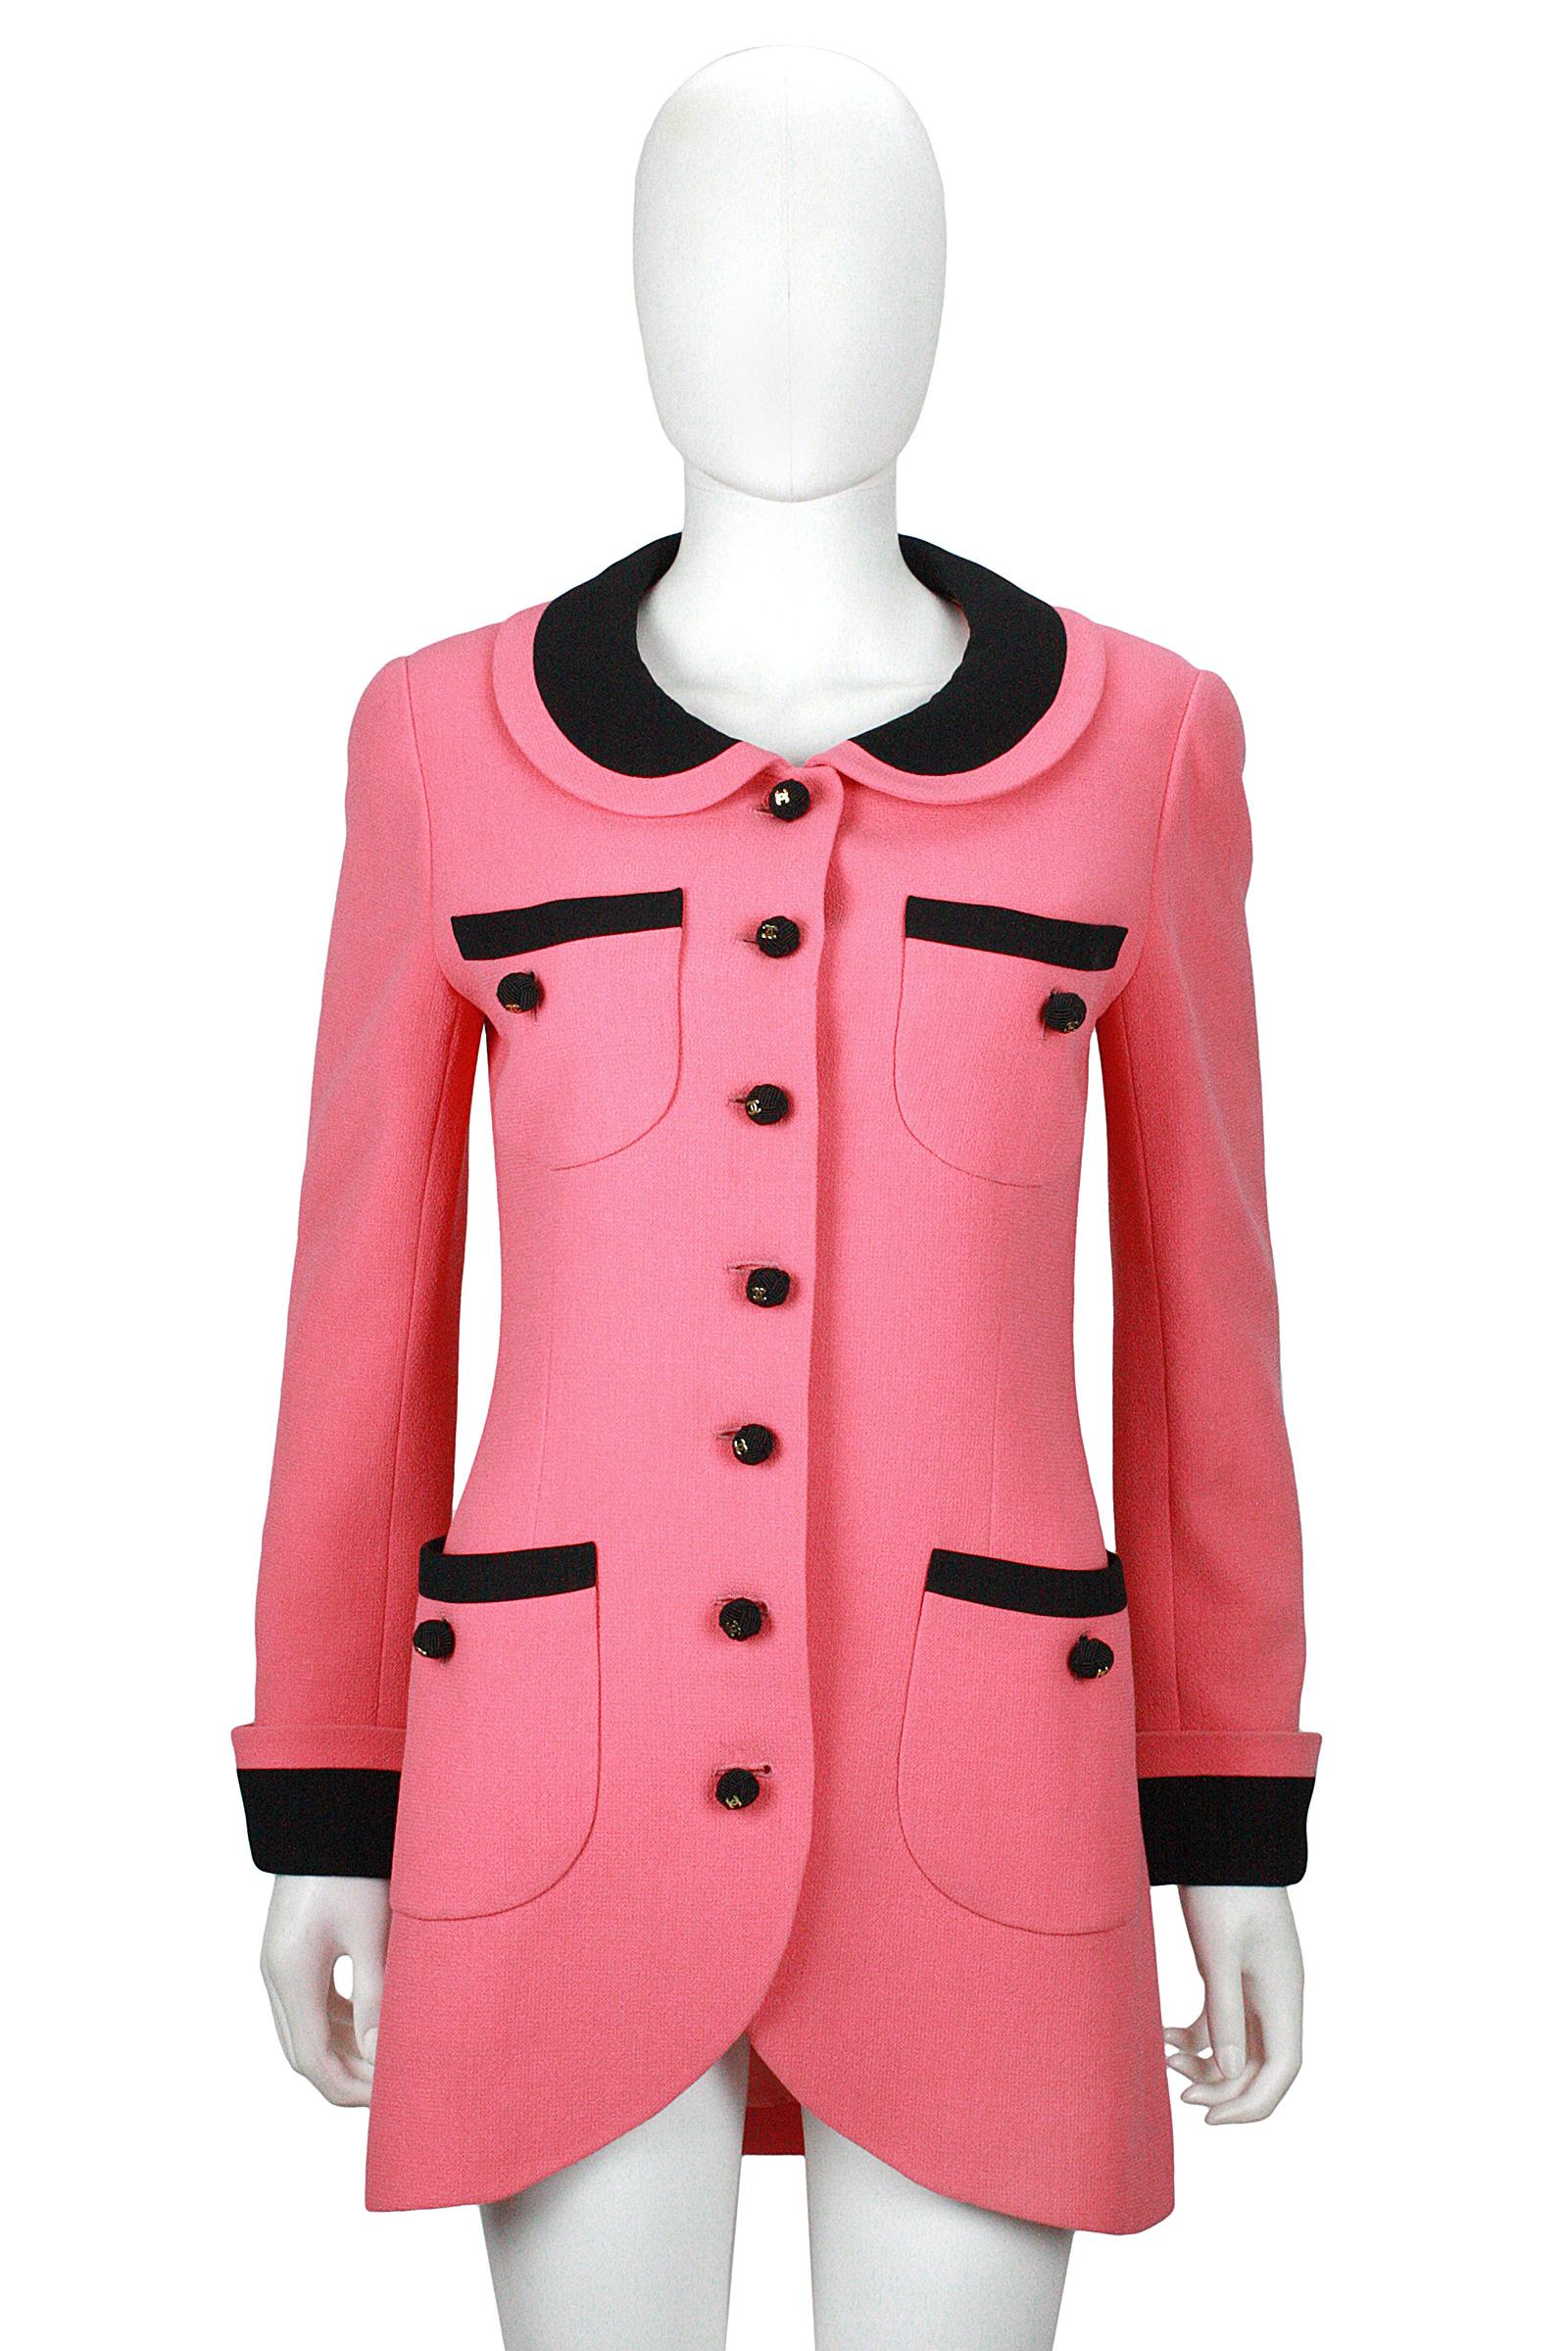 Chanel from the 1980s by Karl Lagerfeld, pink with black trim, long tailored jacket, or mini-dress.
It features a tulip hem, Peter Pan collar, cuffed sleeves and four our front pockets.
Decorated with black & gold double-C logo buttons.
Fully lined